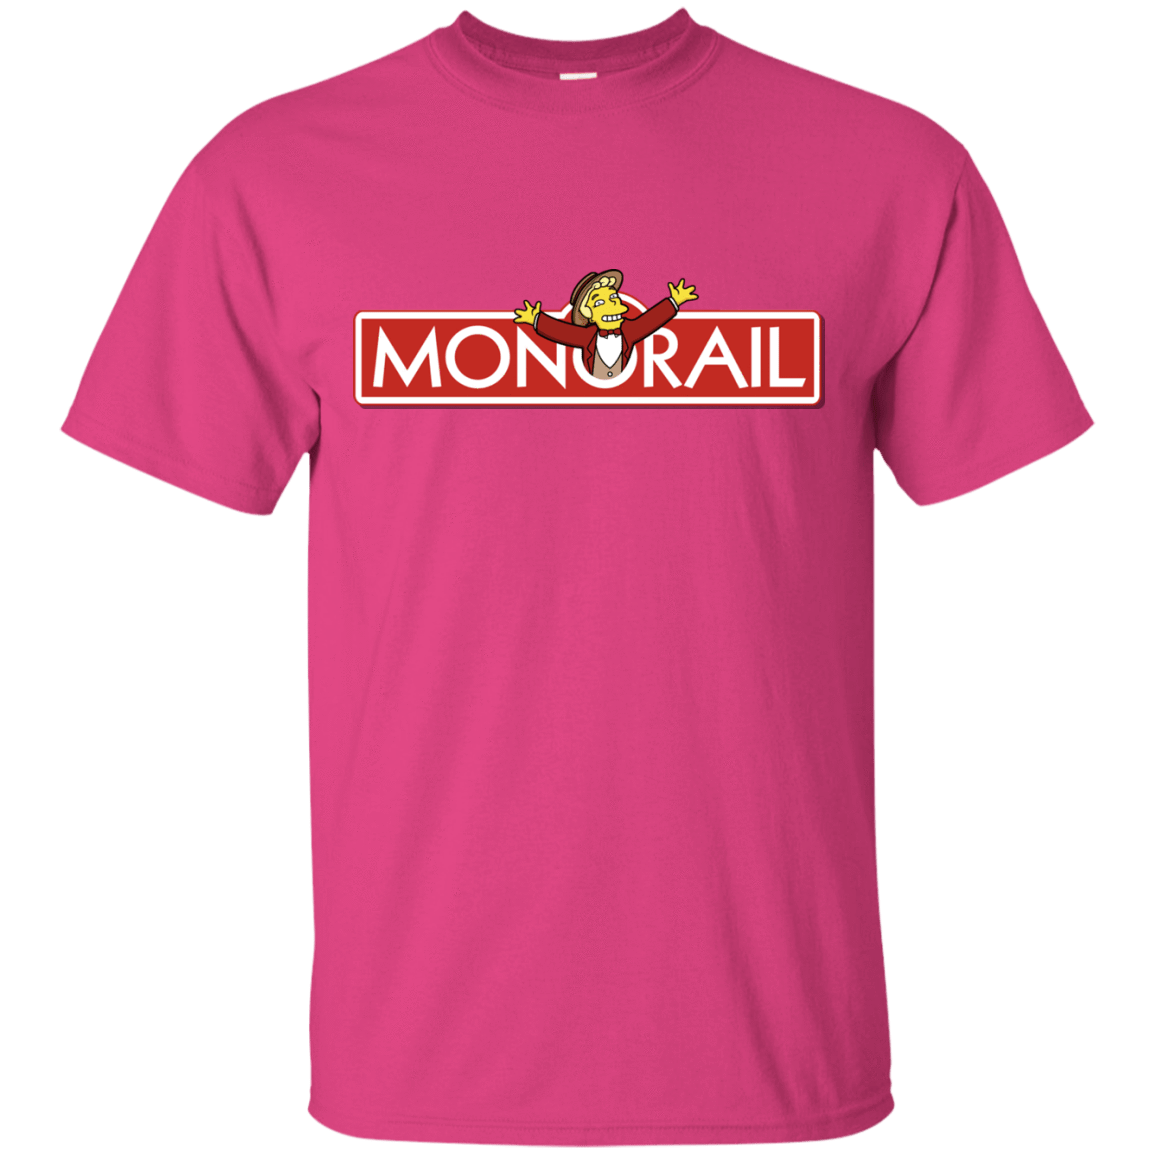 T-Shirts Heliconia / S Monorail T-Shirt